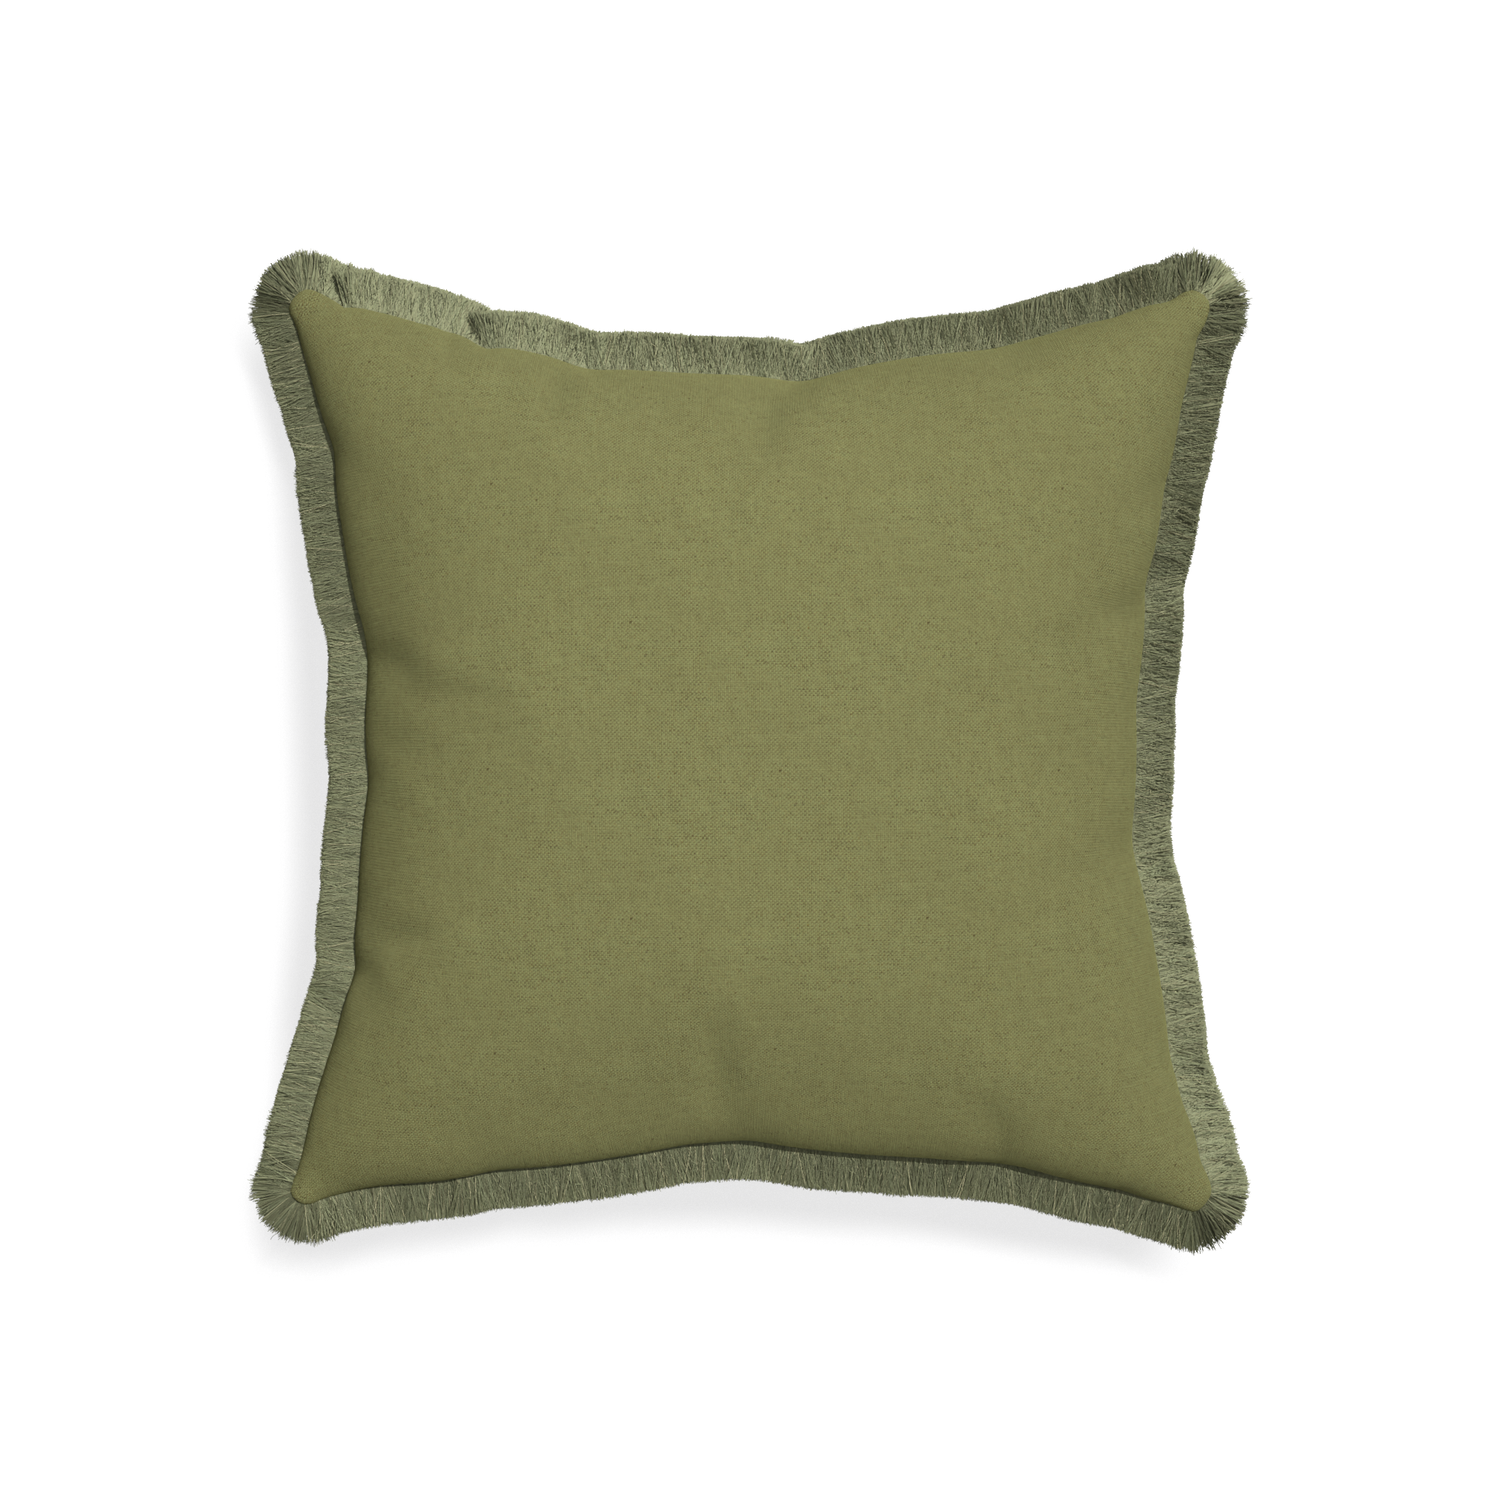 20-square moss custom moss greenpillow with sage fringe on white background